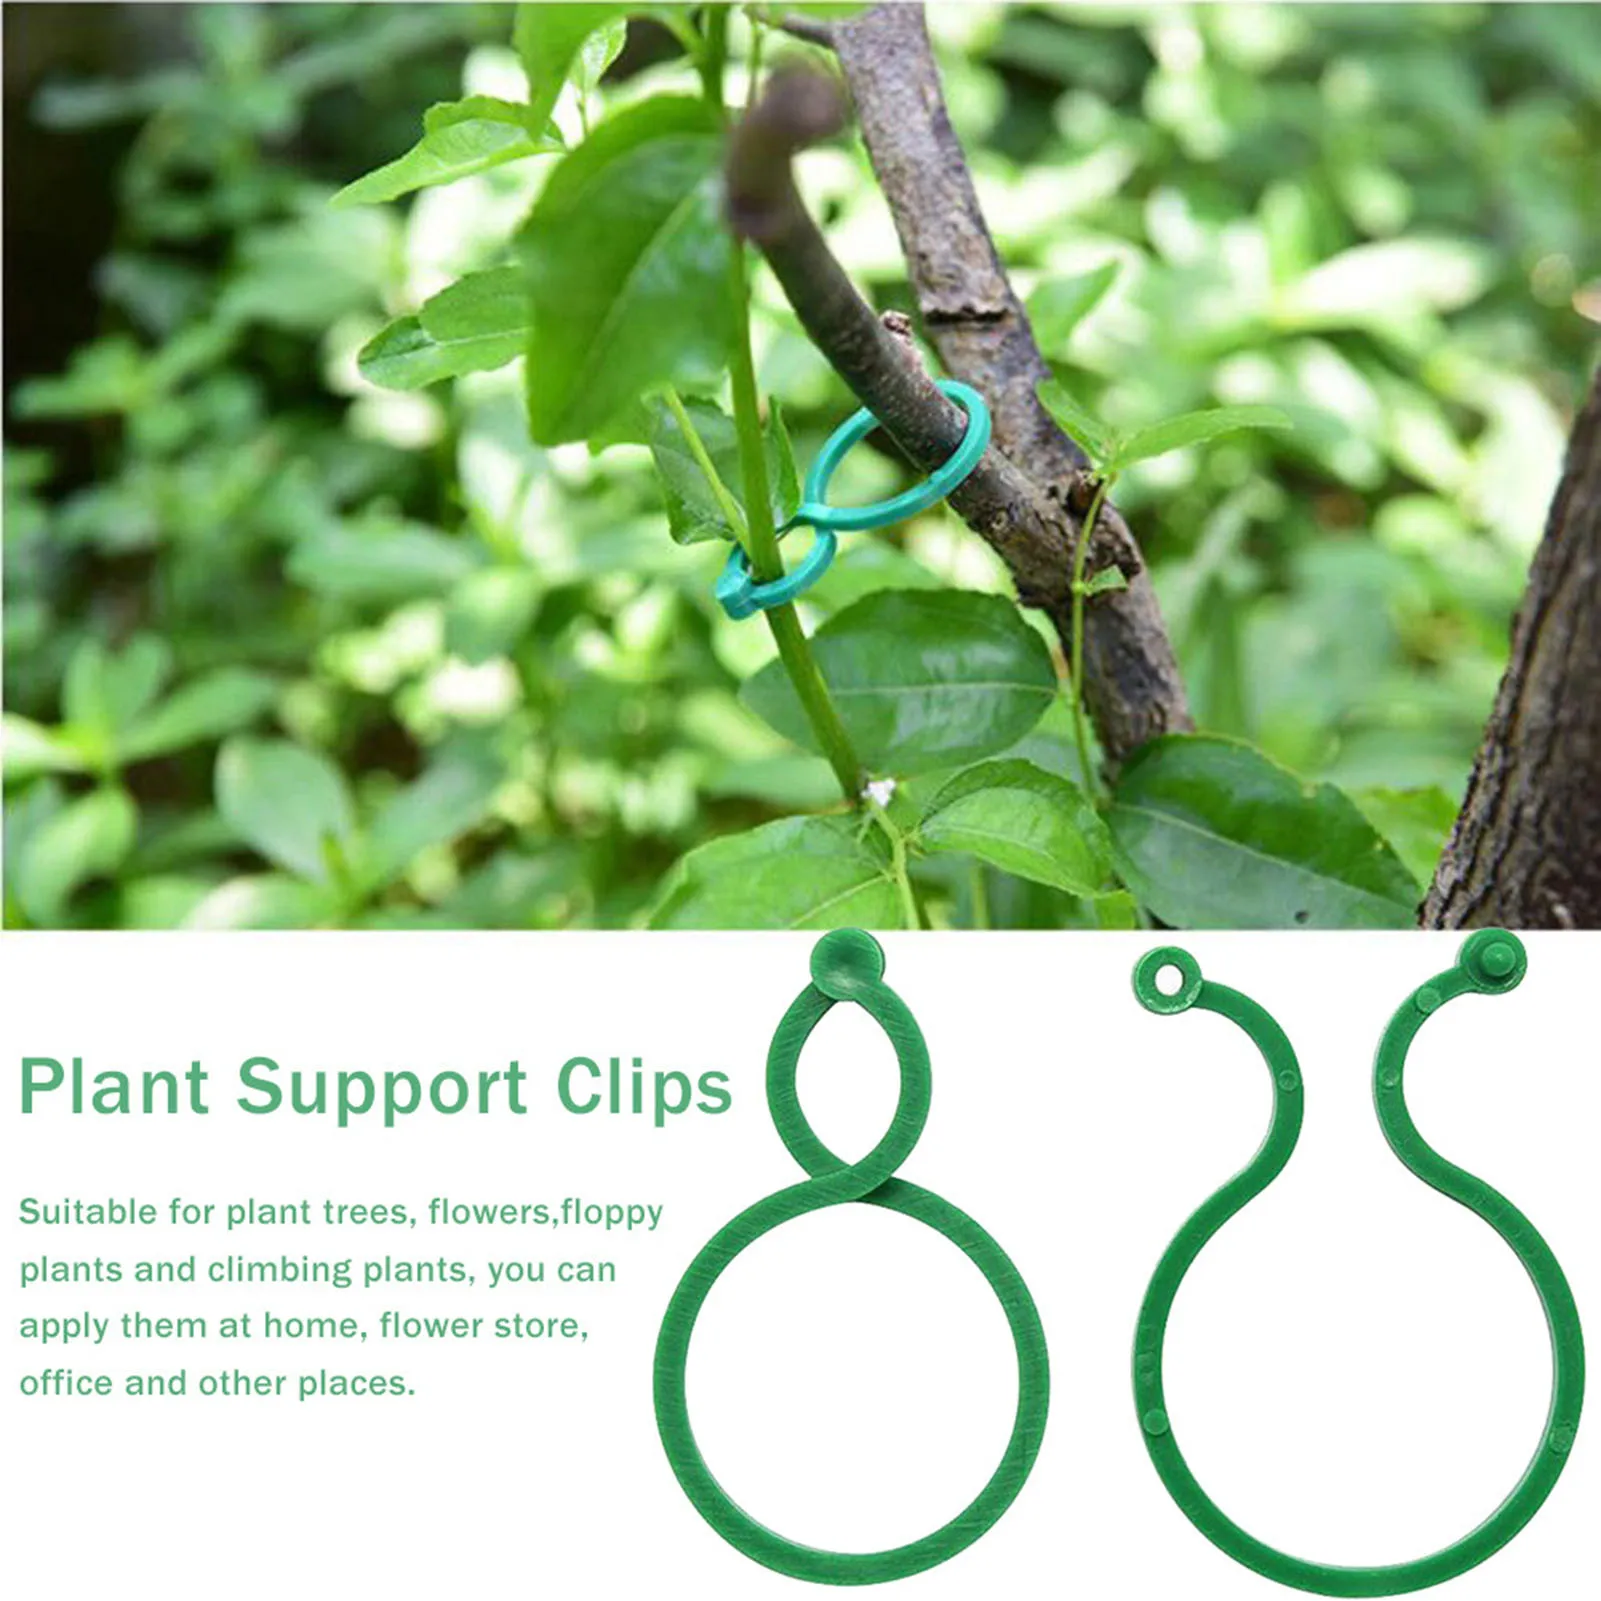 Plant Stem Support Clips for for Securing Plants FASHIONROAD 100Pcs Plant Clips Garden Clips 